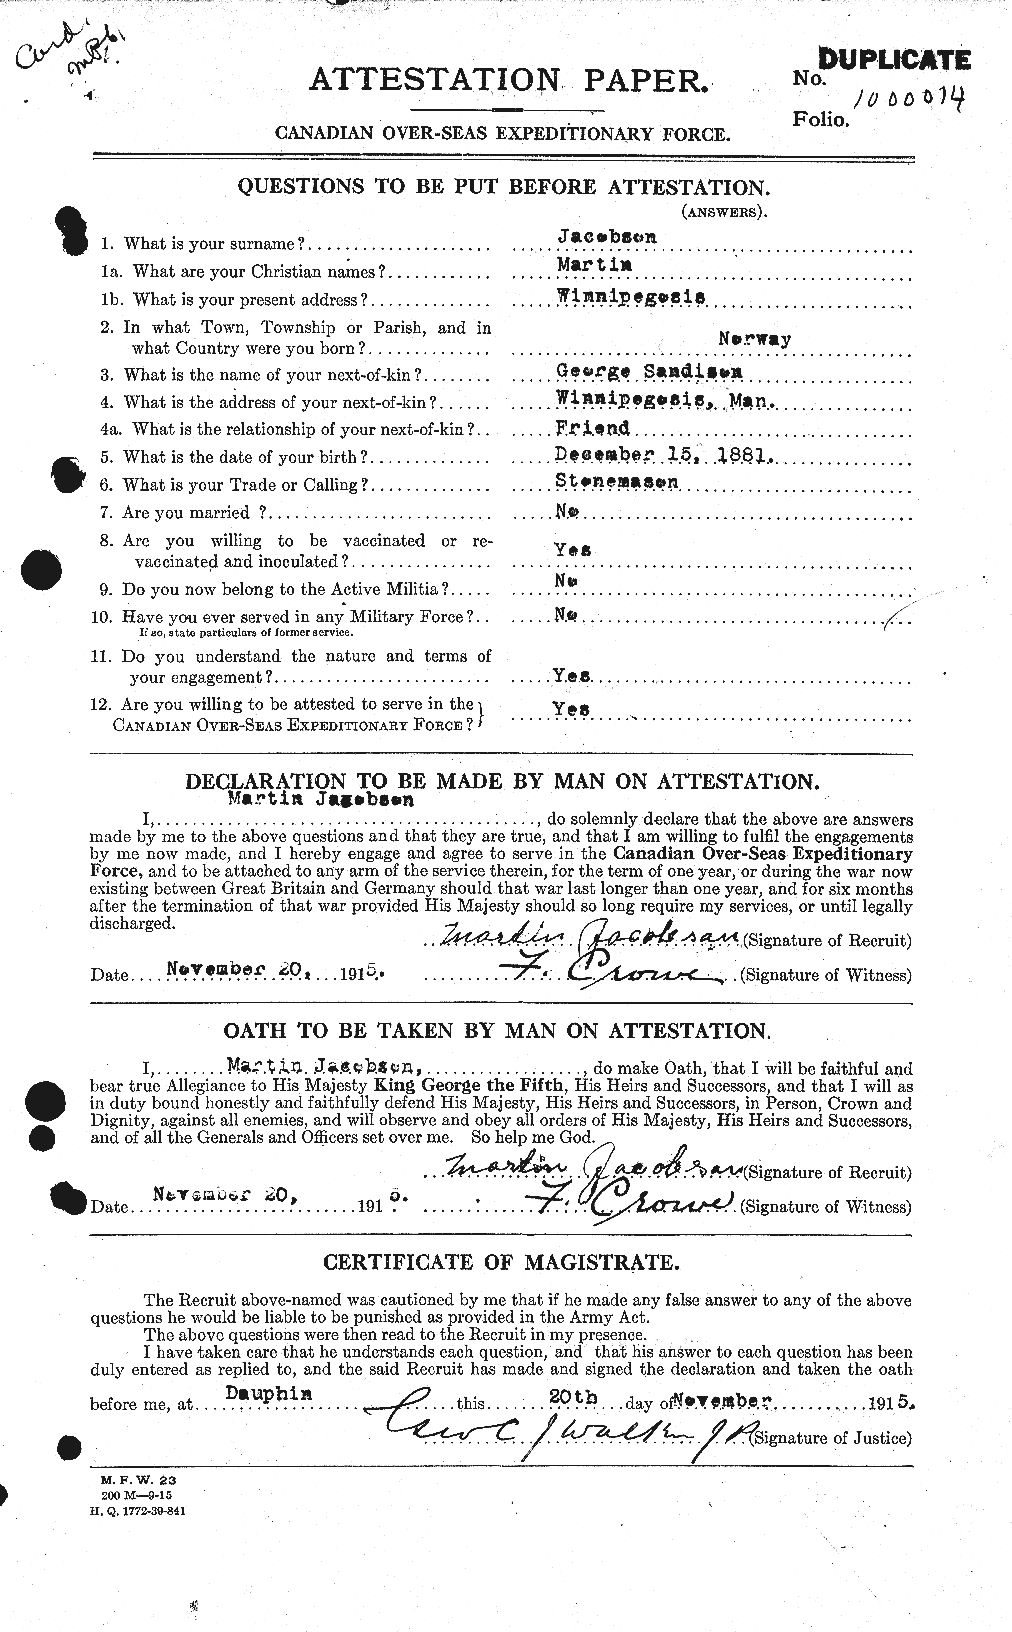 Personnel Records of the First World War - CEF 414287a